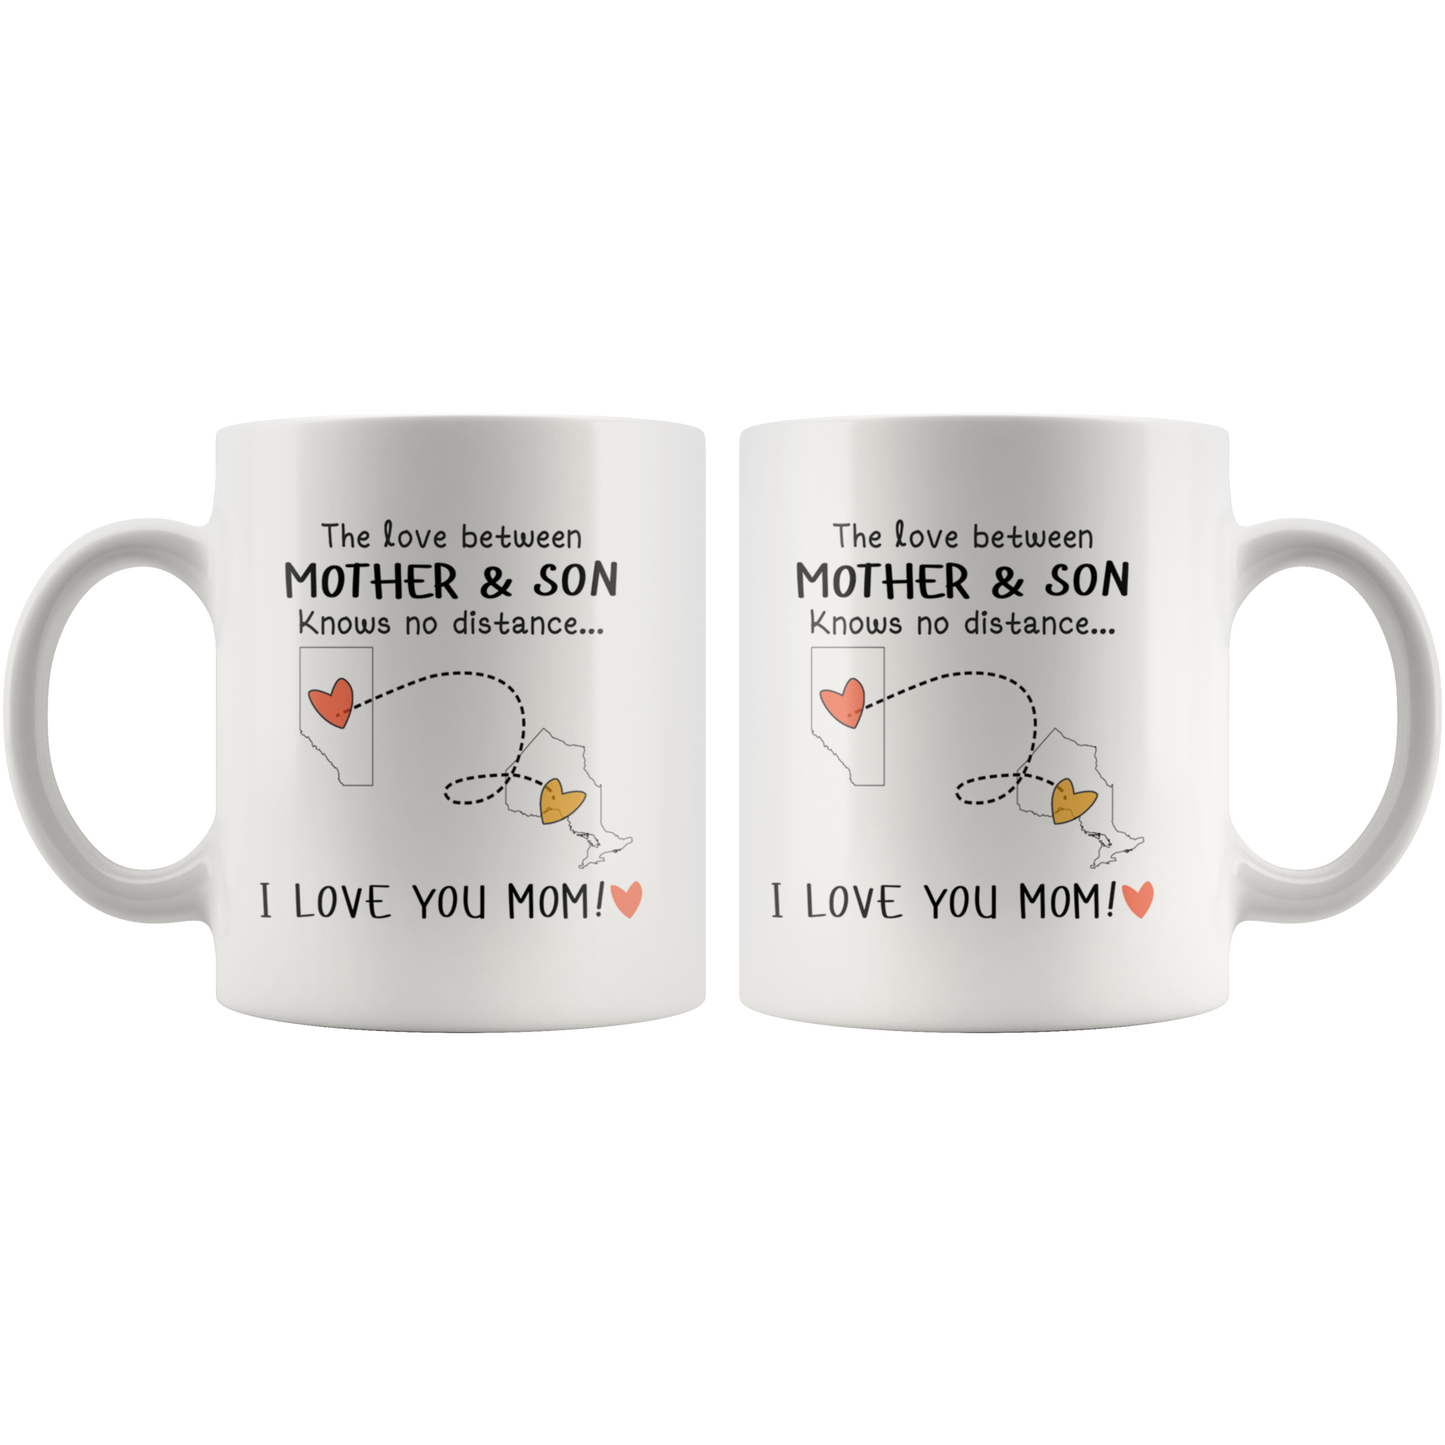 MUG0120547161-sp-16973 - Mother's Day Gifts from Son - The Love Between Mother and So